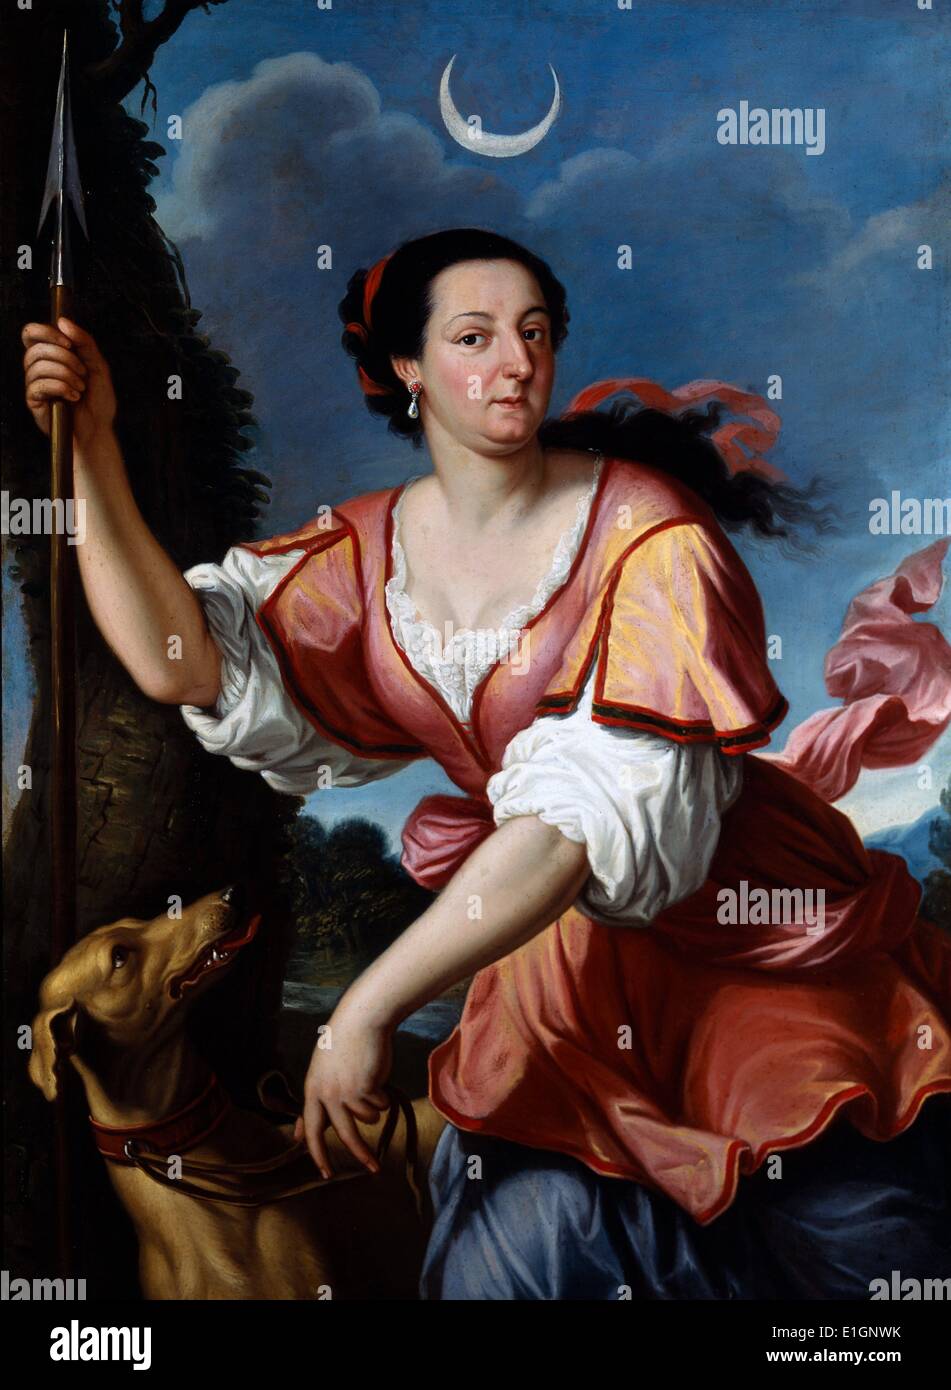 Christina Queen of Sweden (1626 – 19 April 1689),  Queen of Sweden 1633 - 1654, portrayed as the godess Diana. Attributed to Giovanni Domenico Cerrini 1609 - 1681 Stock Photo